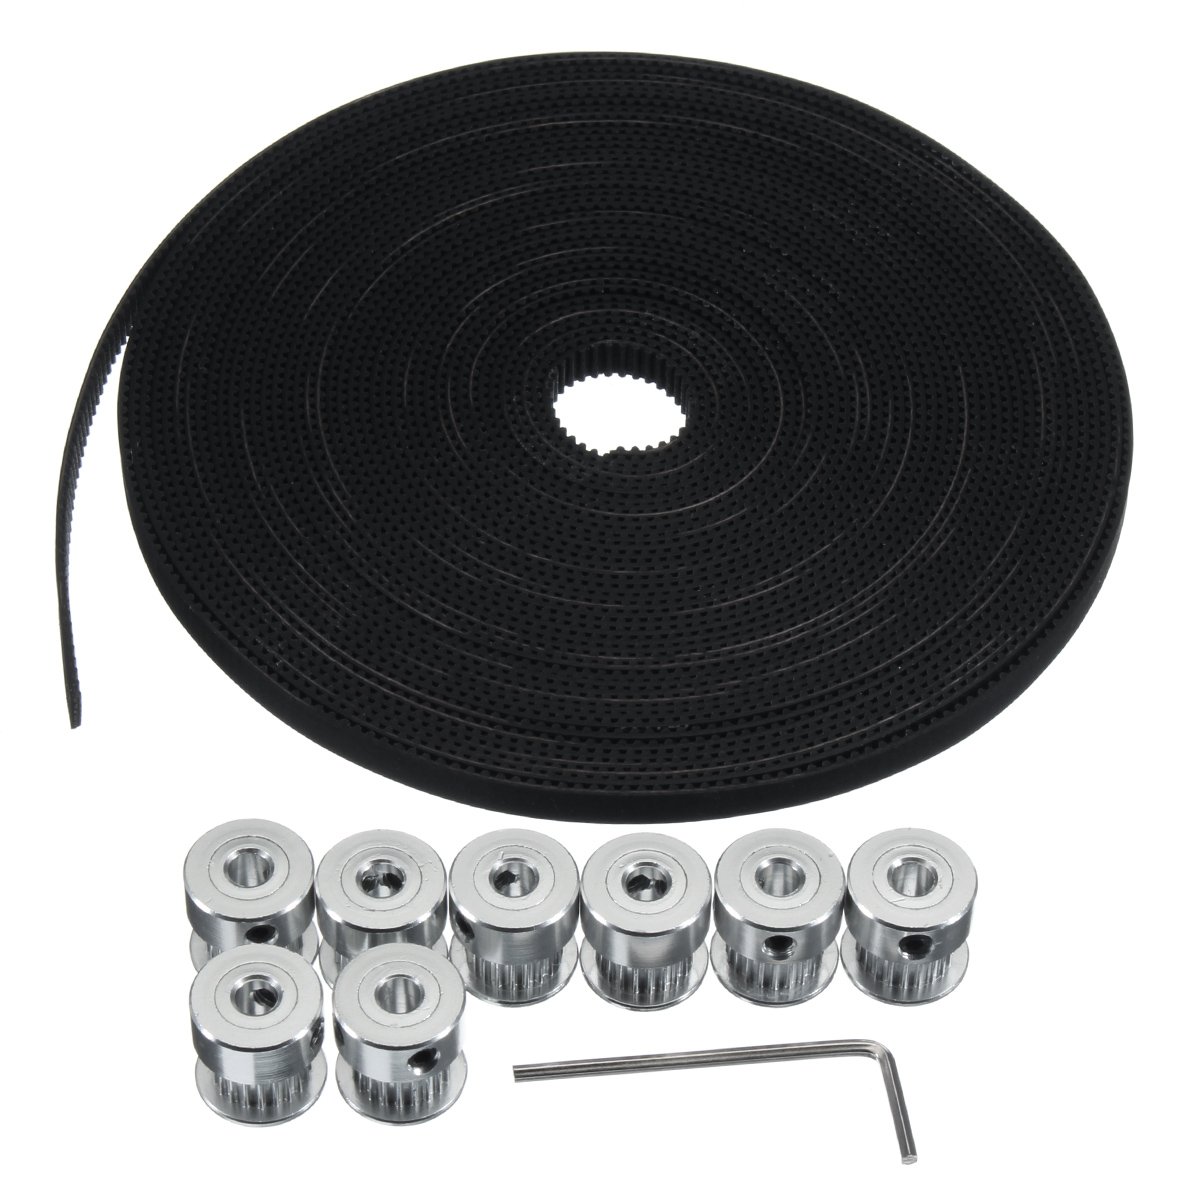 10M GT2 Timing Belt 6mm Wide + 10x Pulley + L Shape Wrench For 3D printer CNC RepRap 2